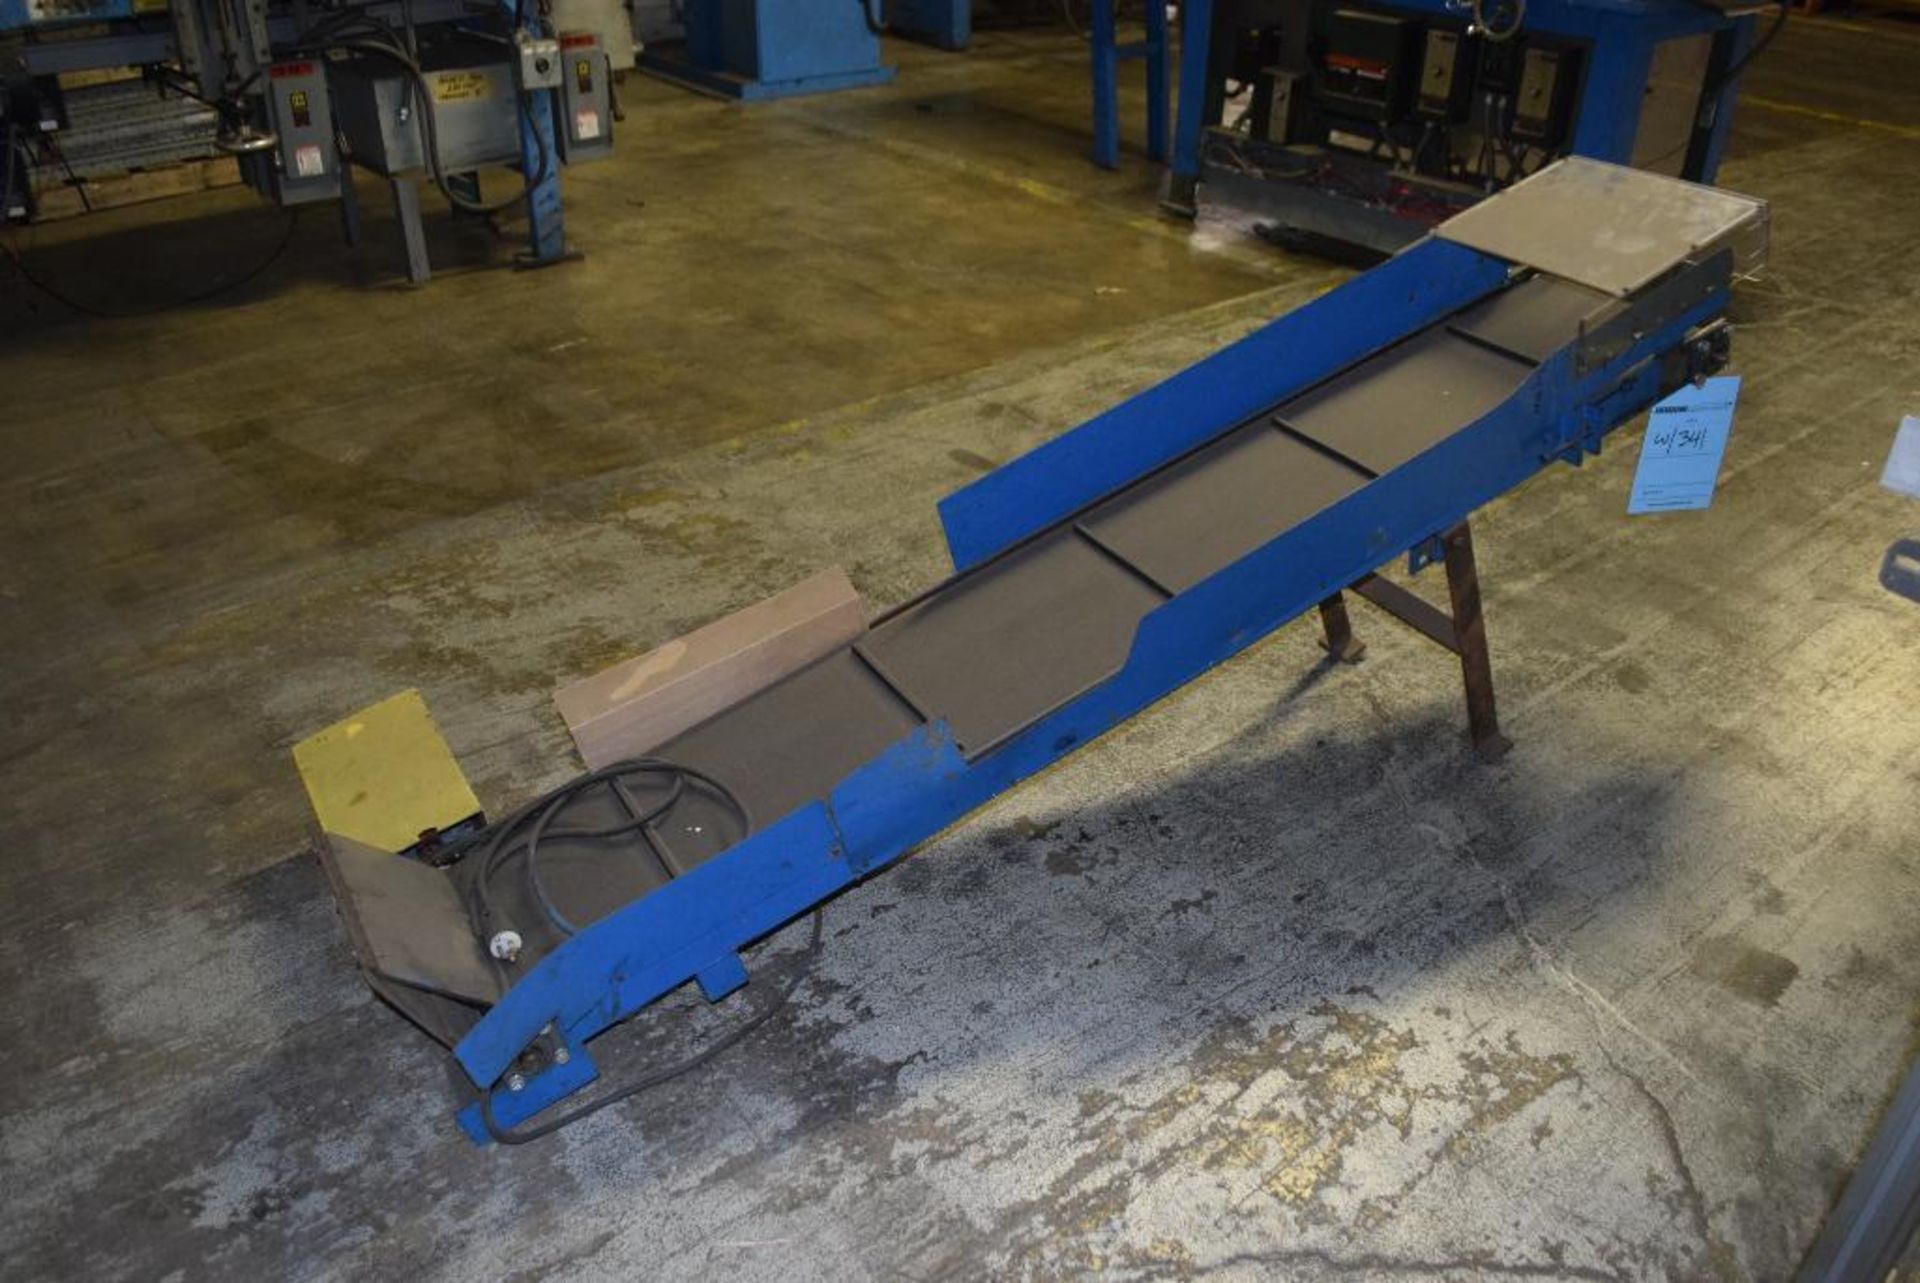 Lot Of (8) Belt conveyors. Approximate 4" wide x 6' long, 18" wide x 15' long, 17" wide x 6' long, 3